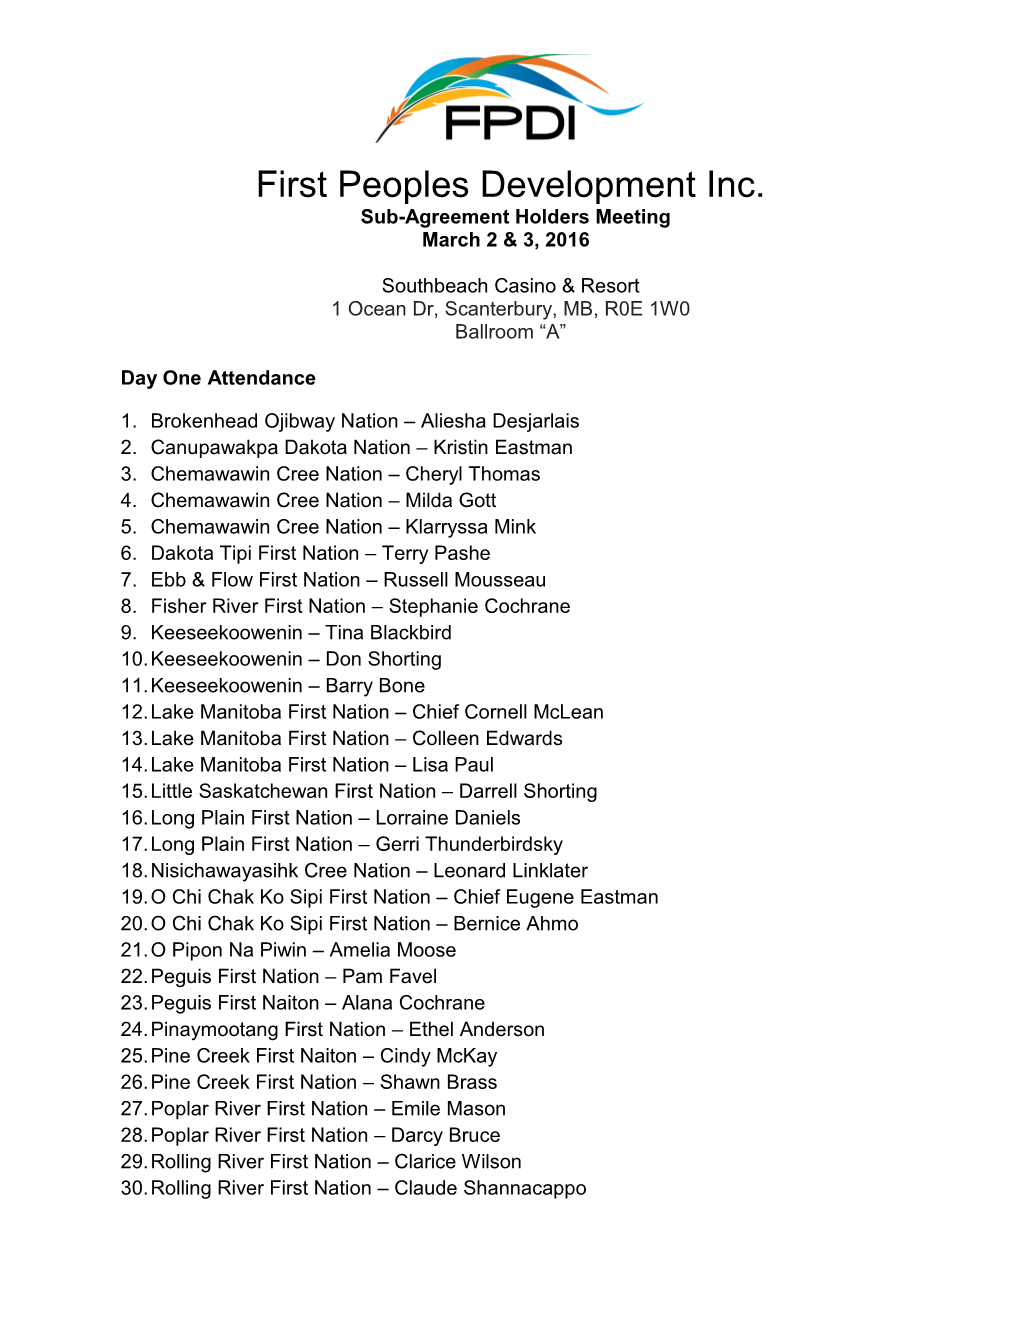 First Peoples Development Inc. Sub-Agreement Holders Meeting March 2 & 3, 2016